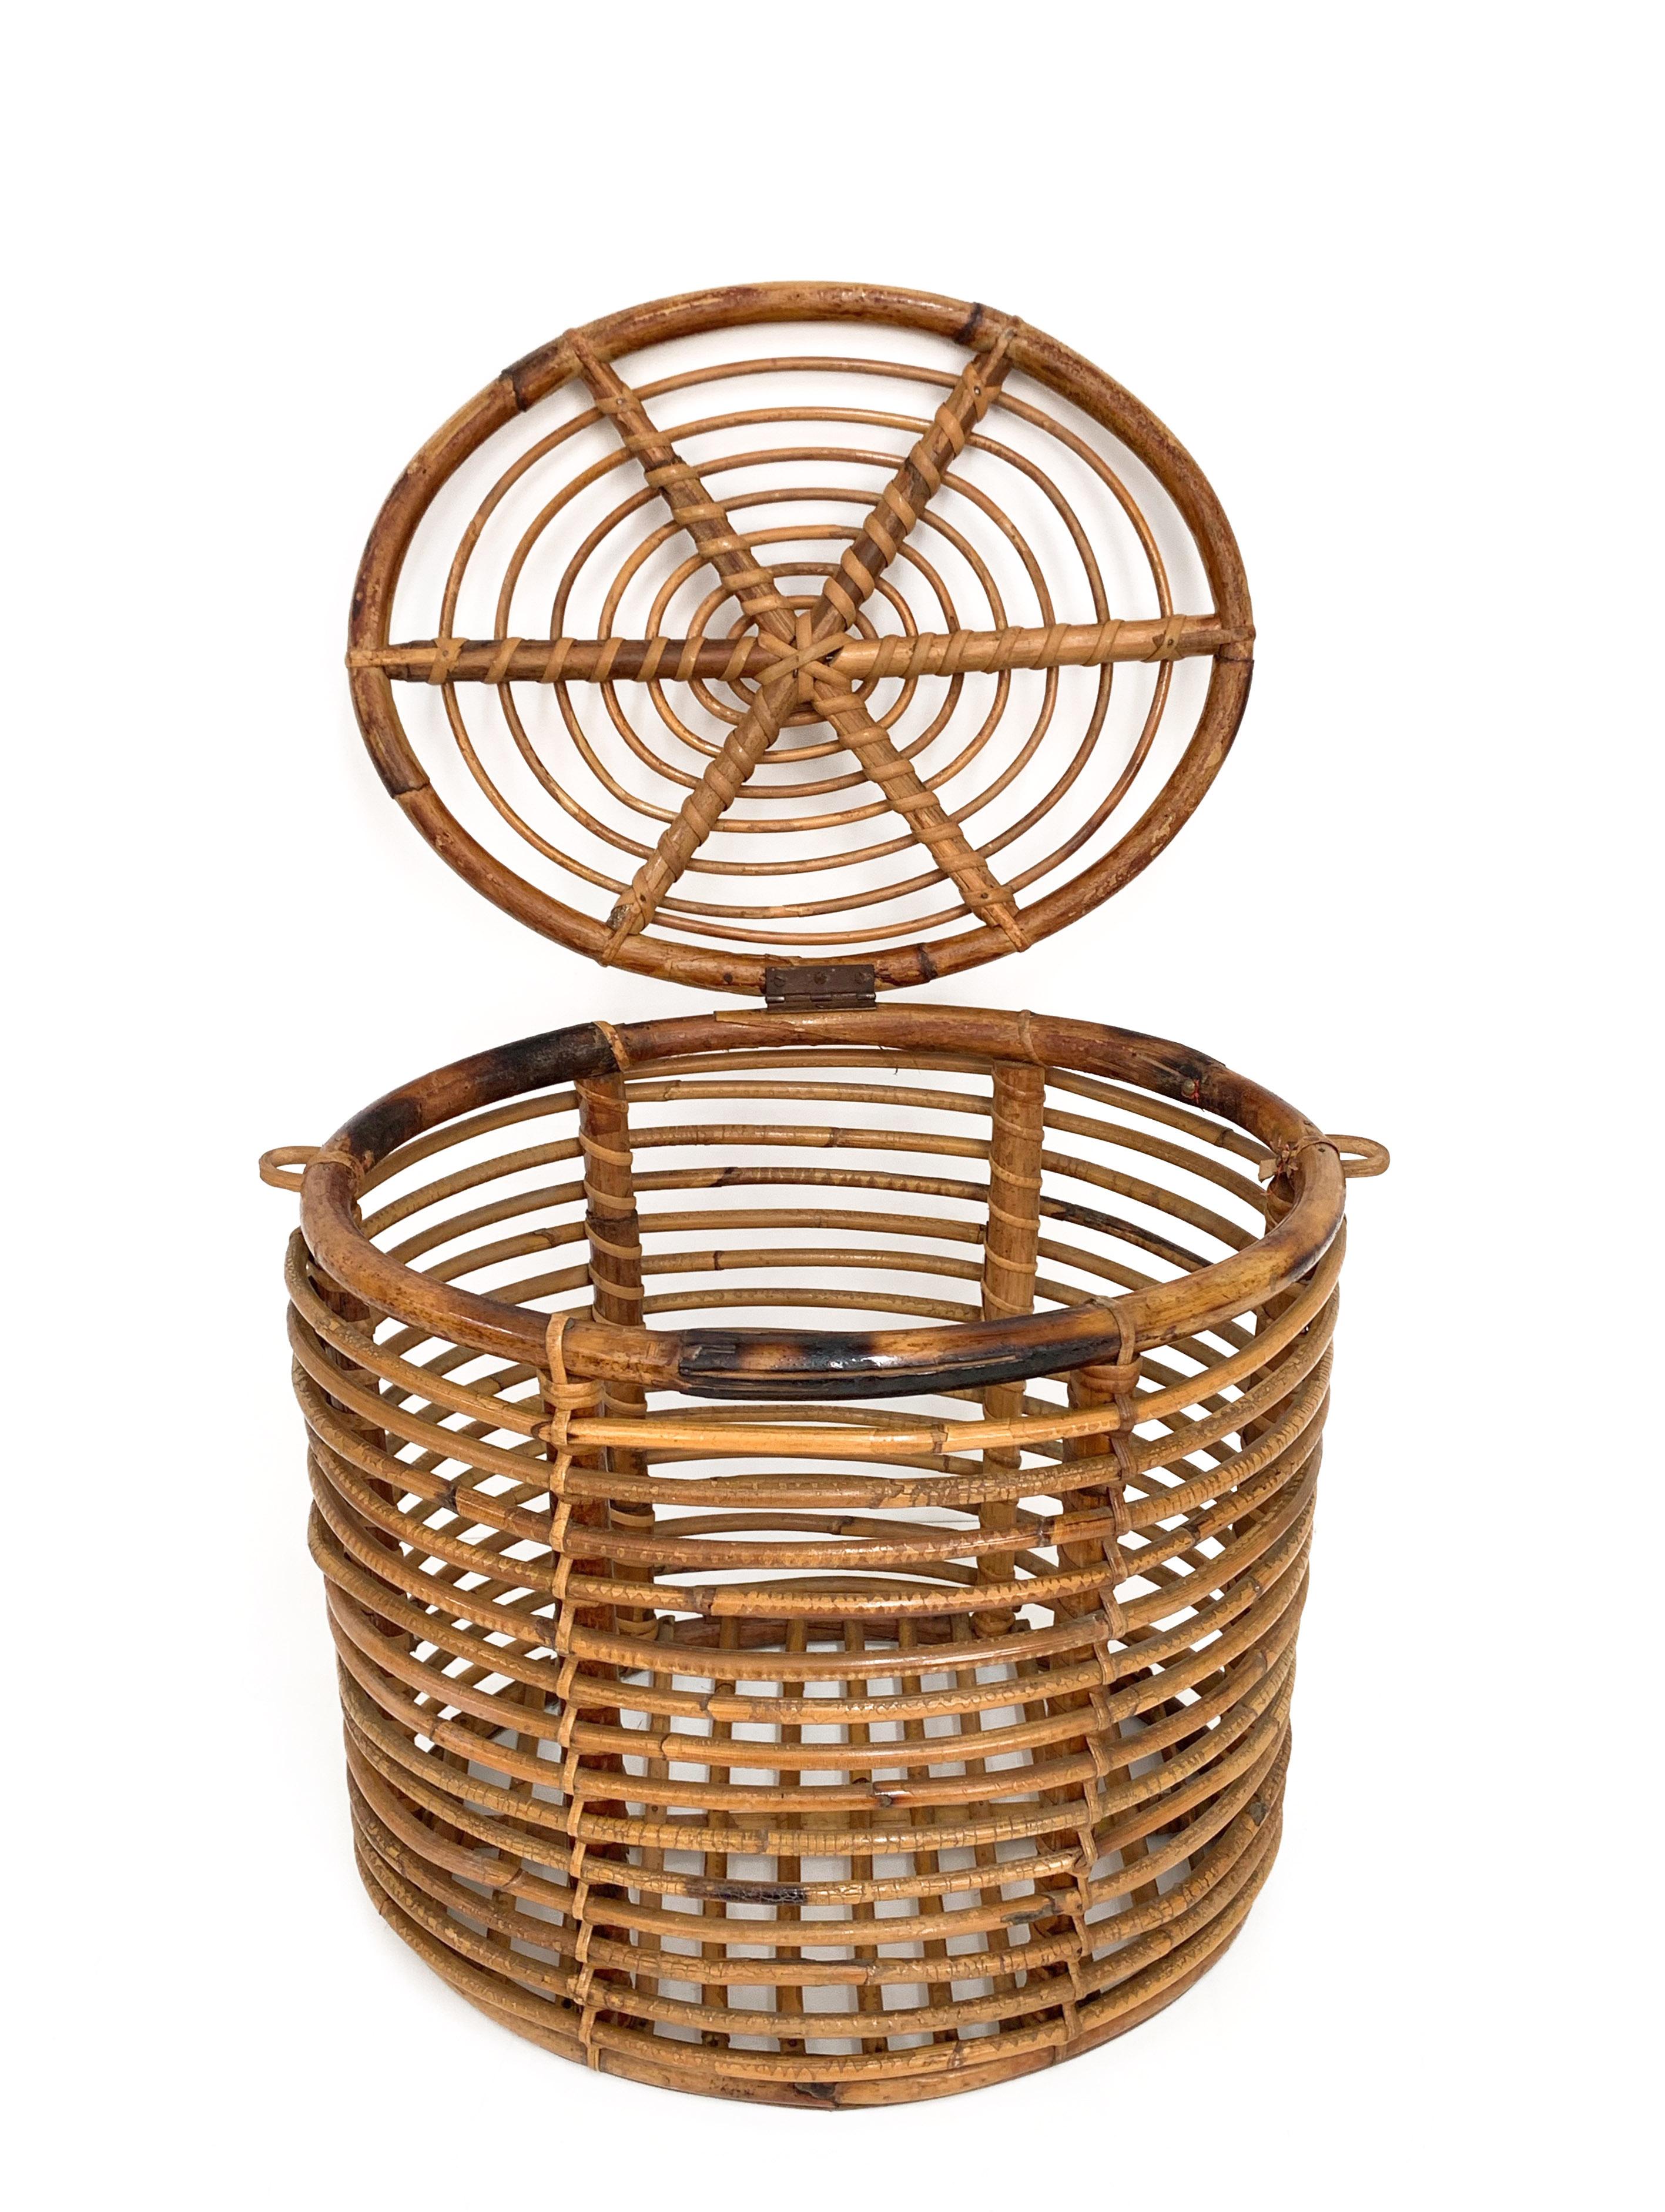 Midcentury French Riviera Bamboo and Rattan Oval Italian Basket, 1950s For Sale 2